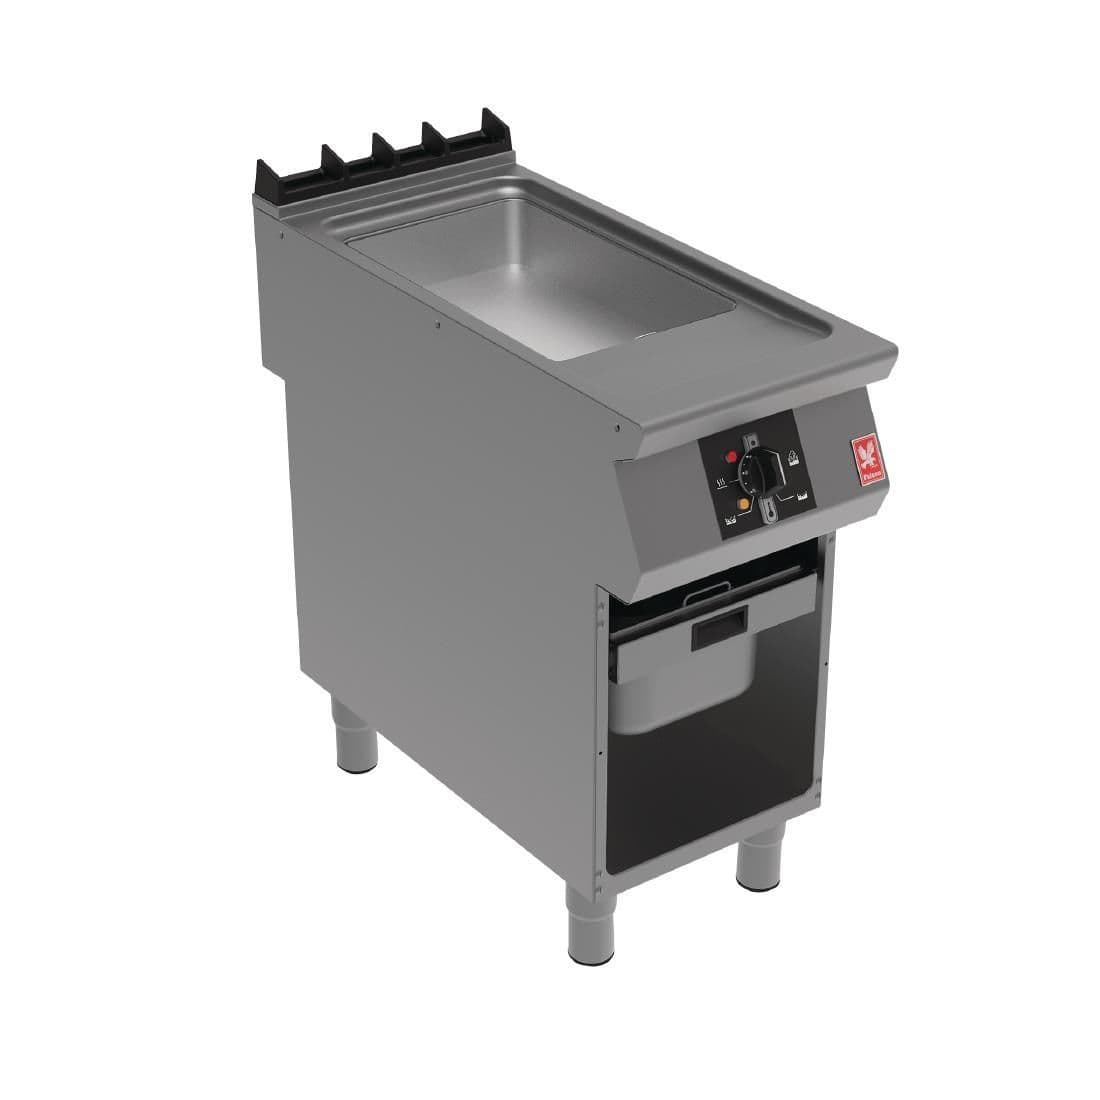 Falcon F900 Flexi Pan with Feet E9941 JD Catering Equipment Solutions Ltd